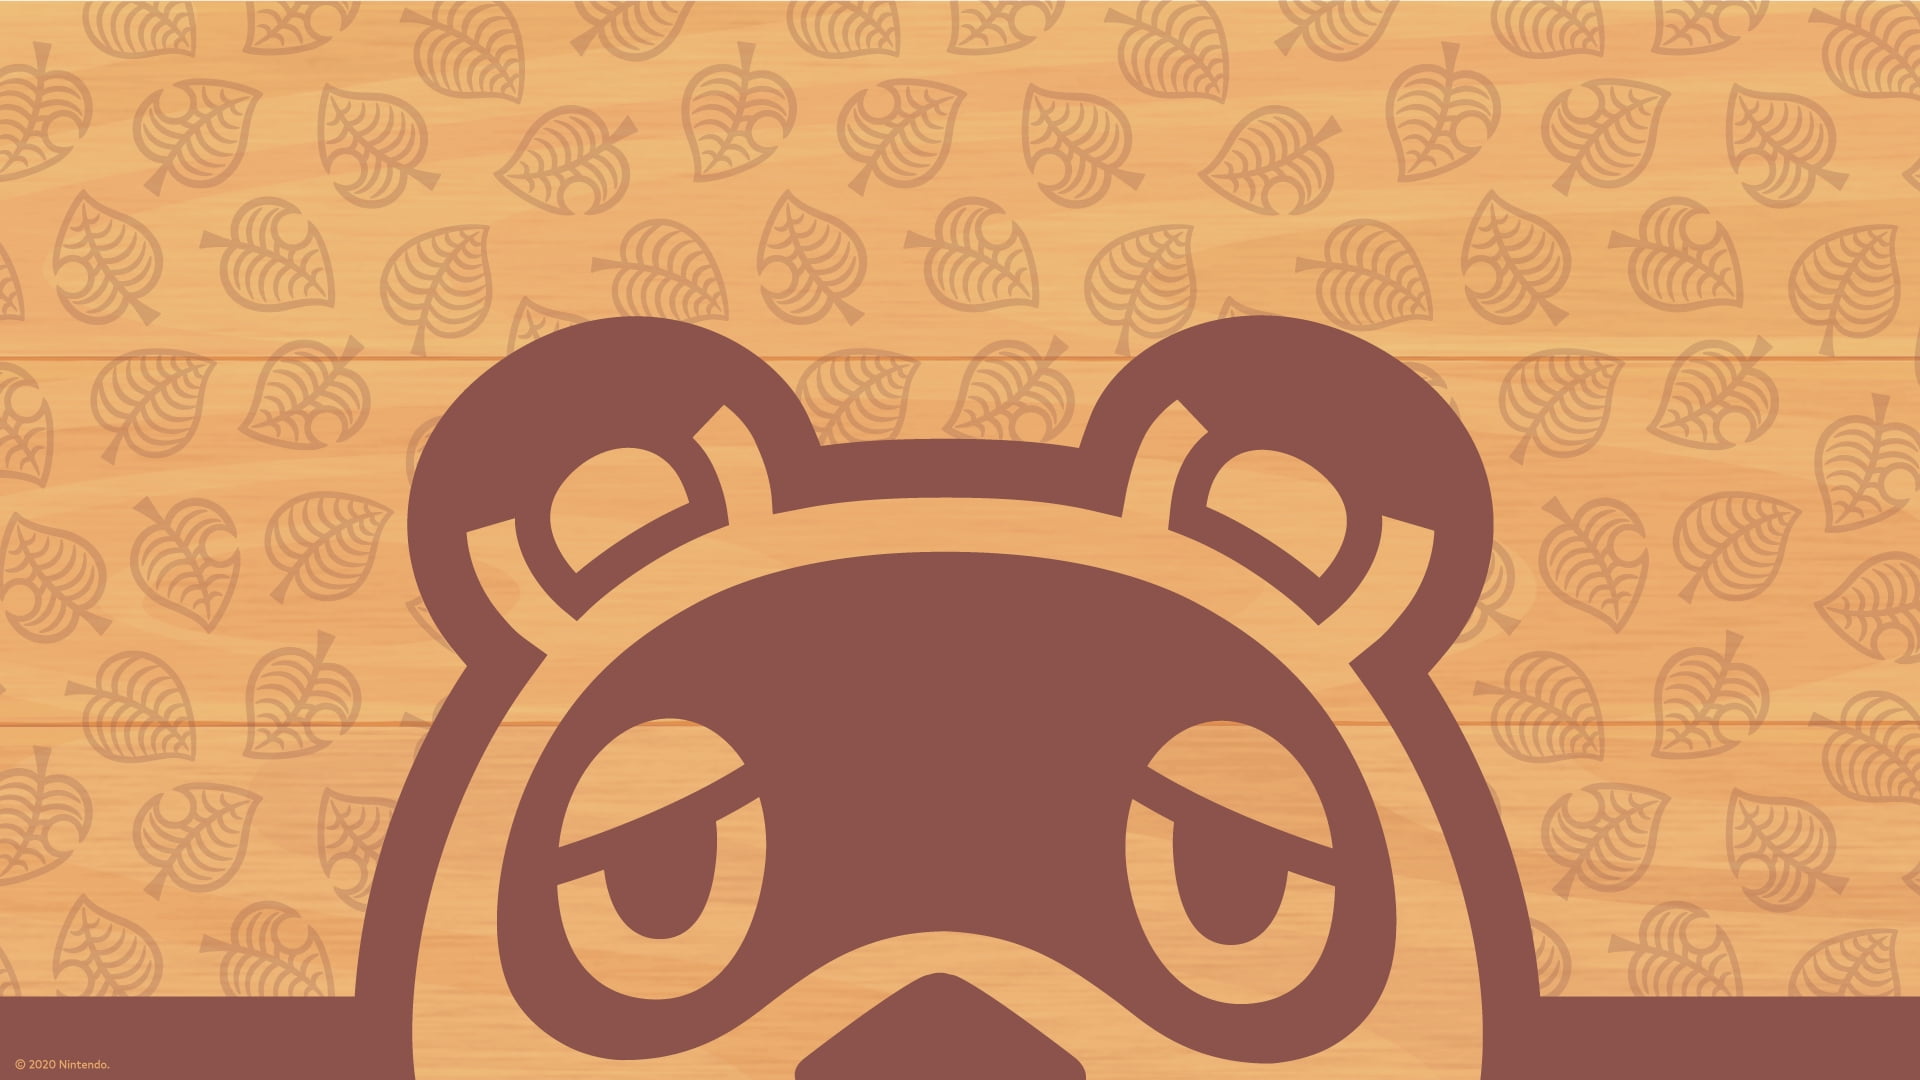 Download Three Cute Animal Crossing New Horizons Wallpapers From Walmart Nintendosoup